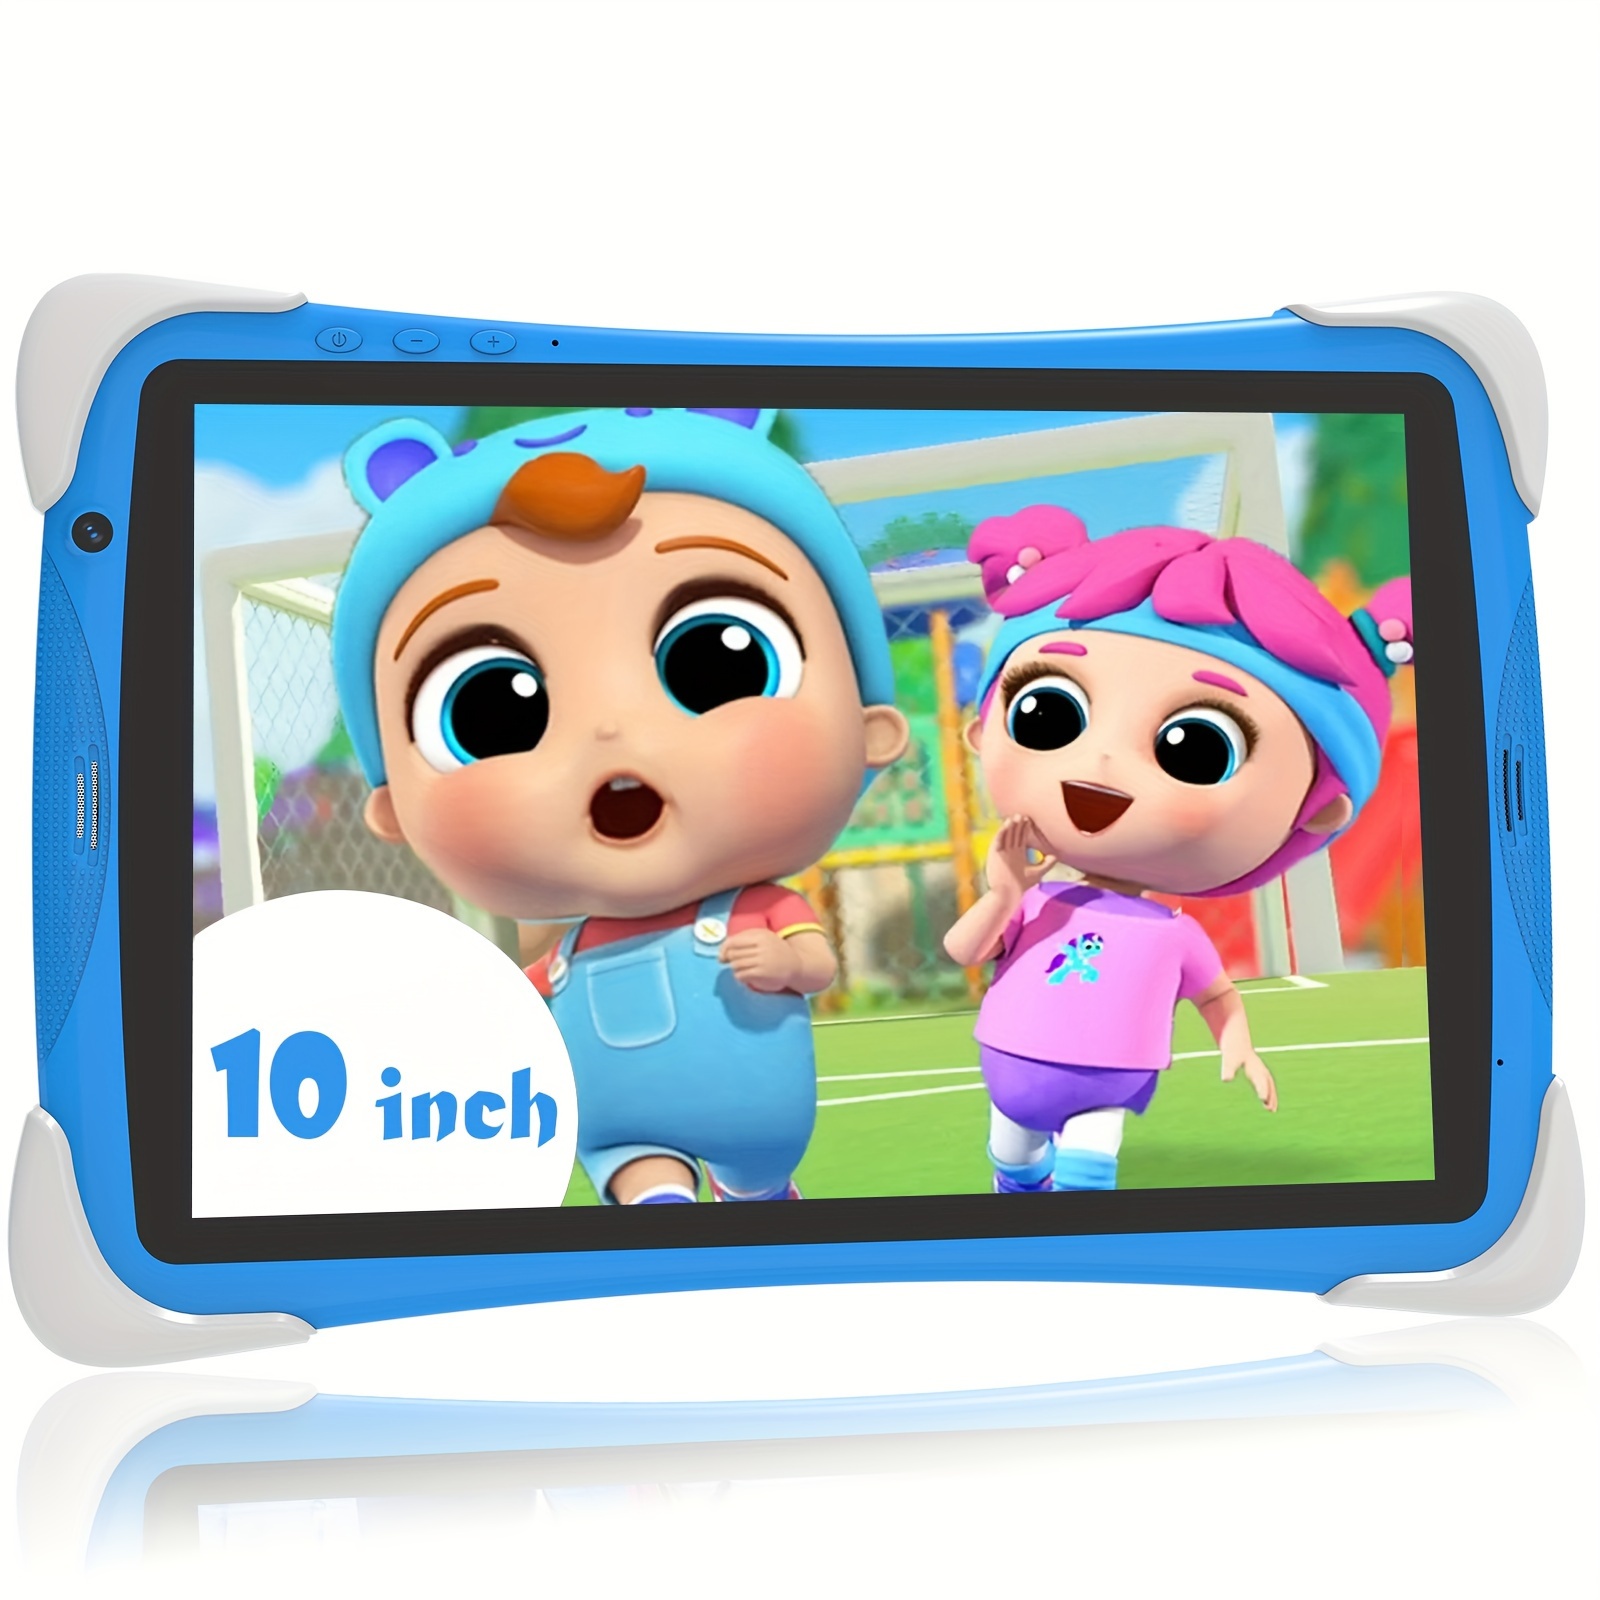 

Kids Tablet, 10 Inch Tablet For Kids, Android 12, 32gb (sd To 128gb), With Parental Controls, Kid Contents Educational Tablet, Dual Camera, Shockproof Case With Stand